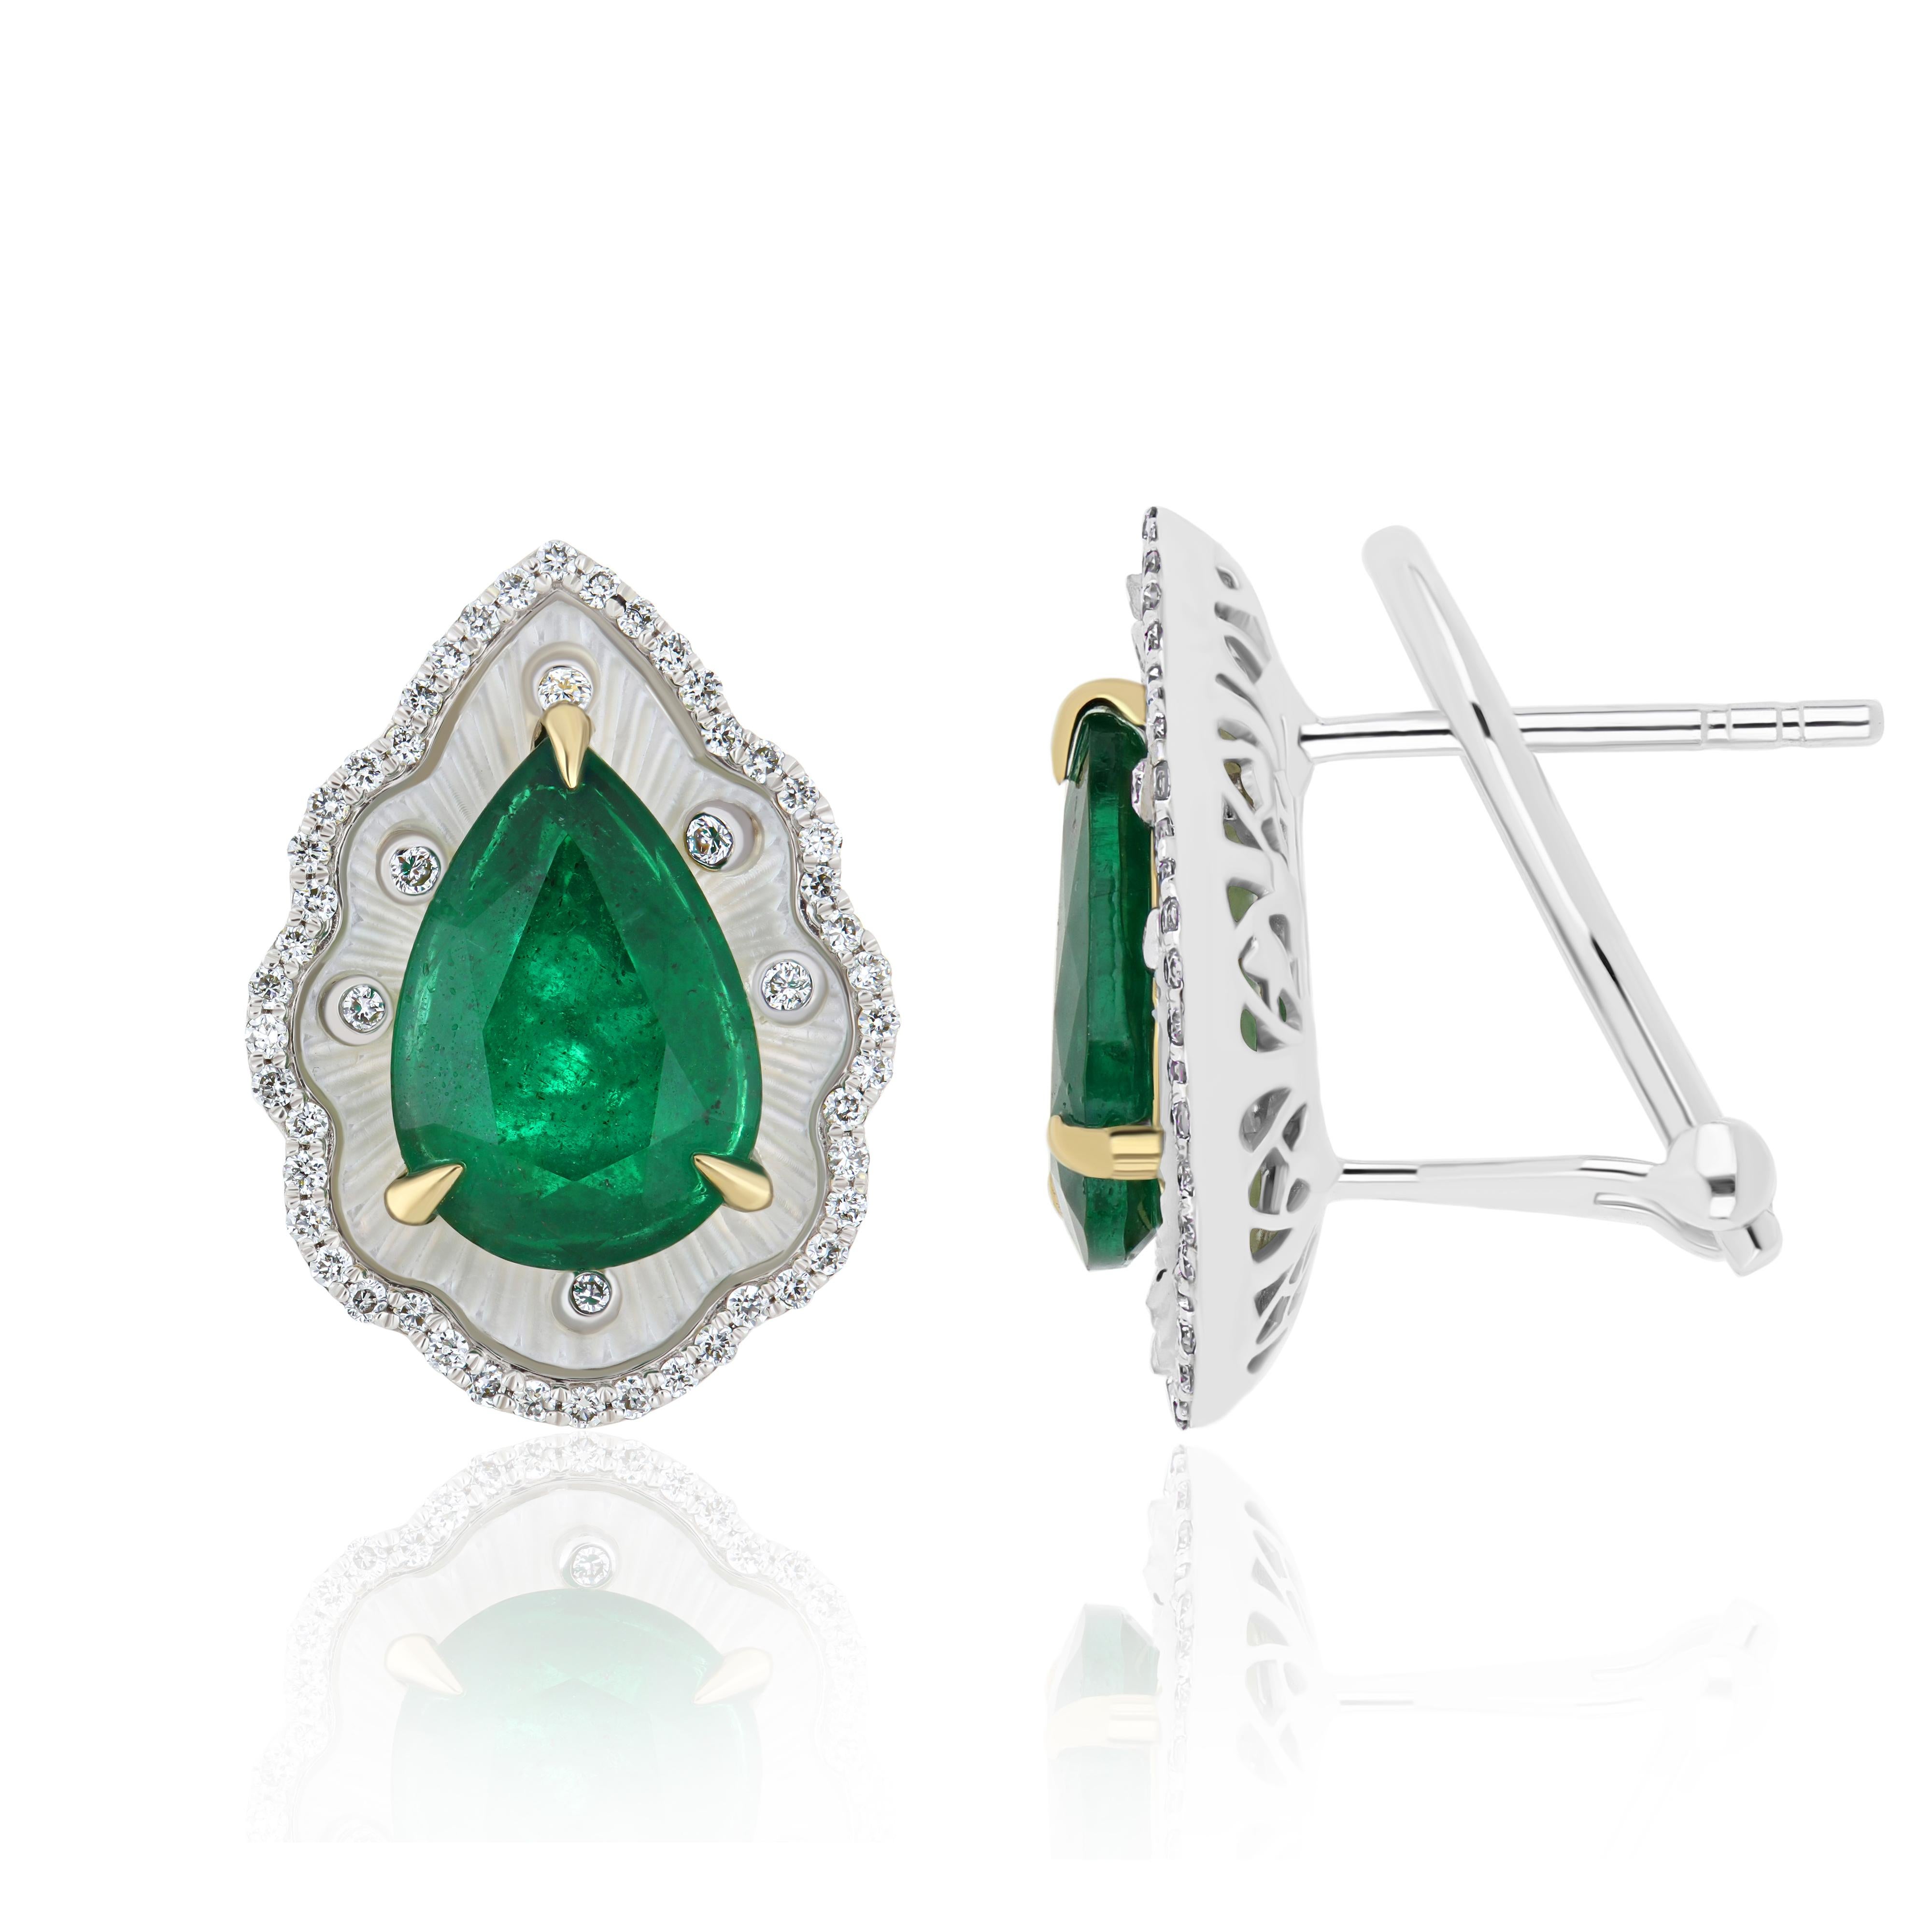 Elegant and Exquisitely detailed White Gold earrings, with 3.85 ts. (total approx.) Emerald cut in Unique Pear Shape, MOP (Mother Of Pearl) with fancy cut weight 1.67CT's ( approx) And accented with micro pave Diamonds, weighing approx. 0.31cts.